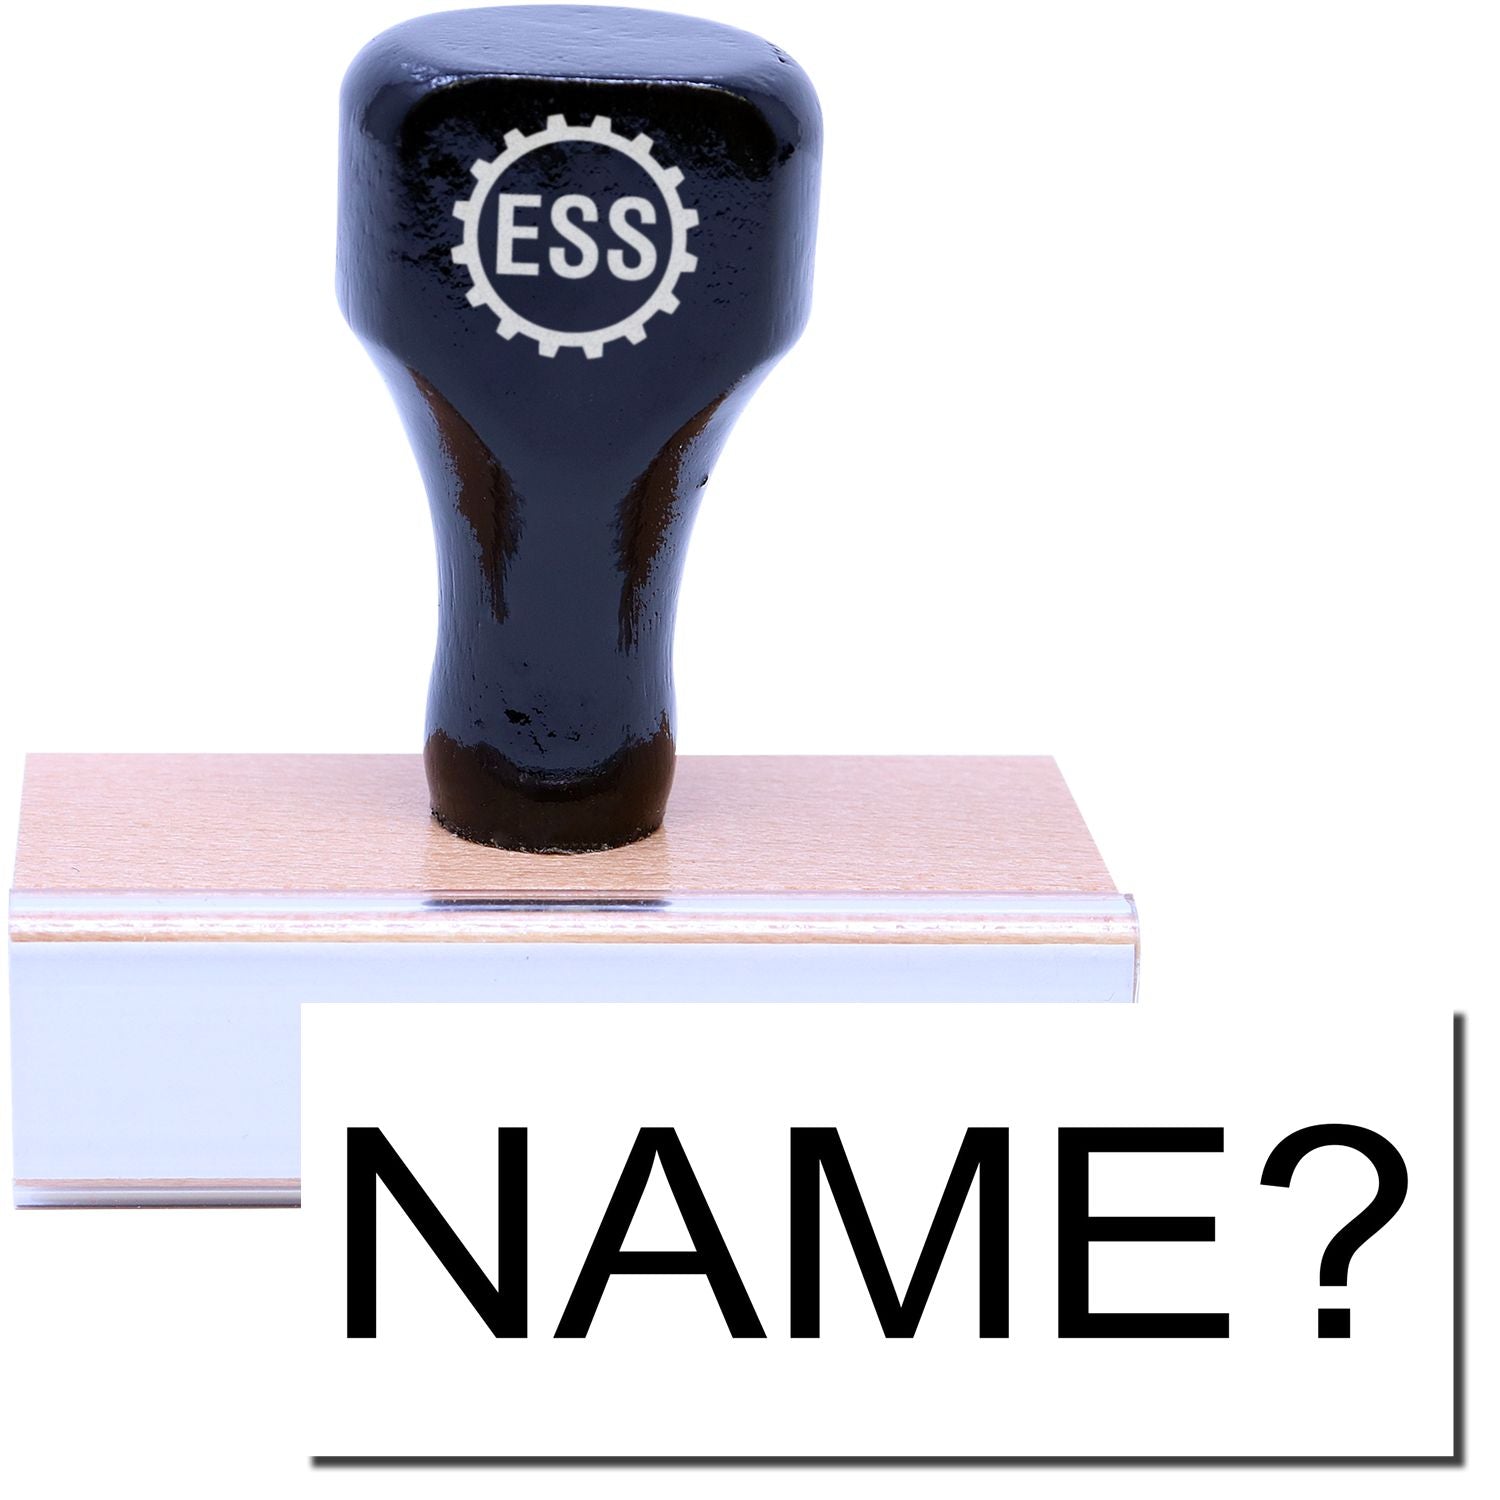 A stock office rubber stamp with a stamped image showing how the text "NAME?" in a large font is displayed after stamping.